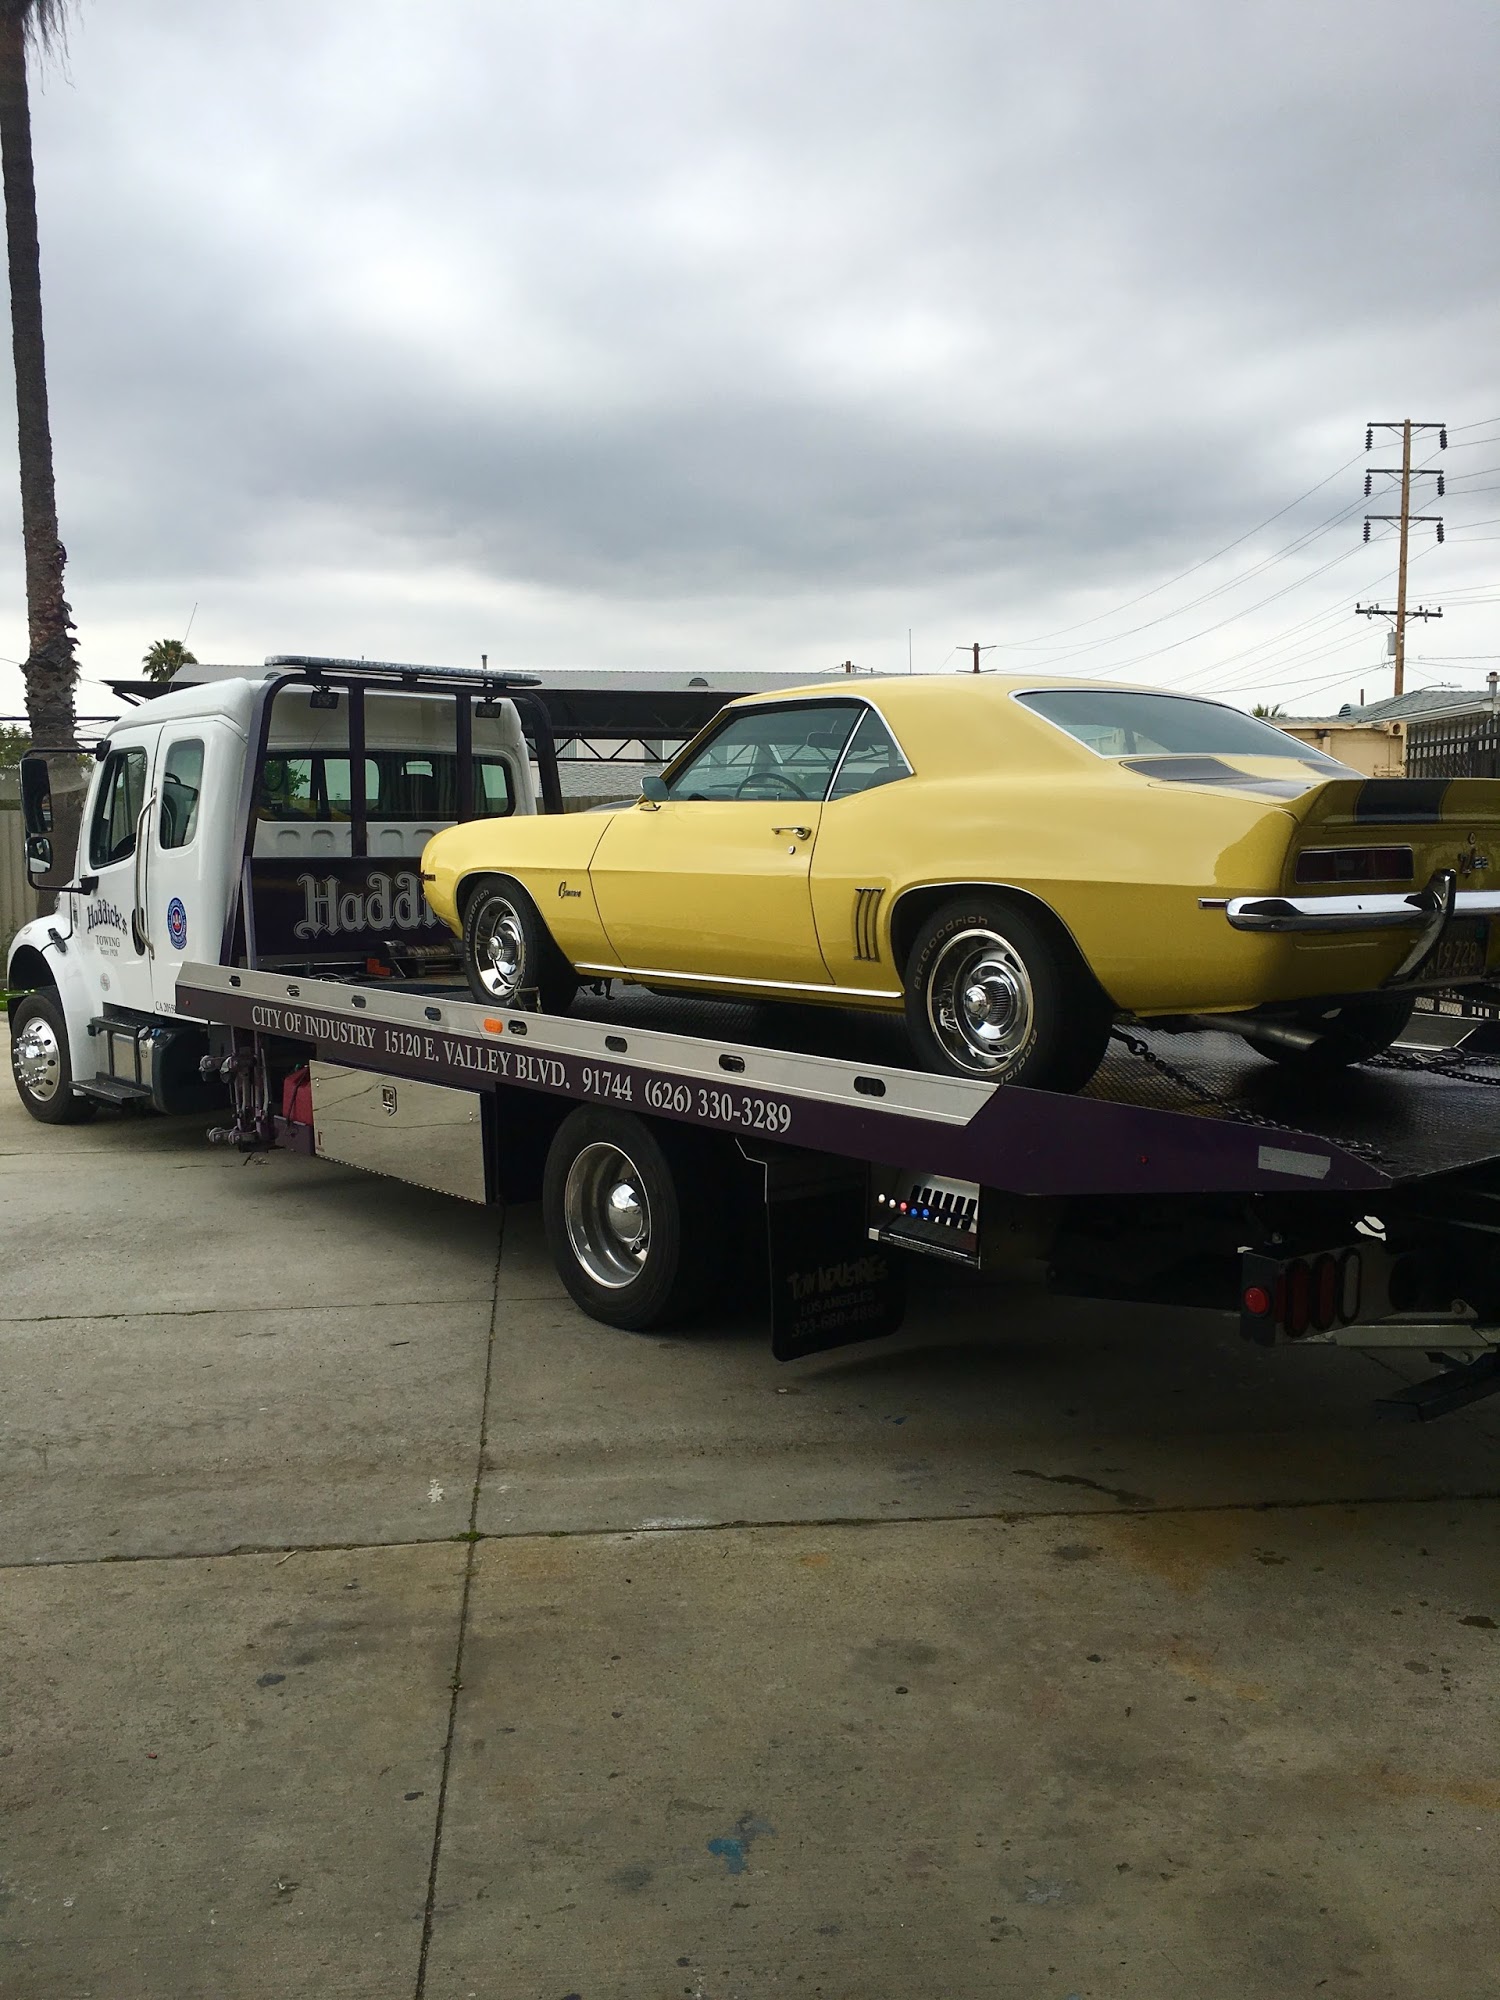 Haddick's Towing and Transport